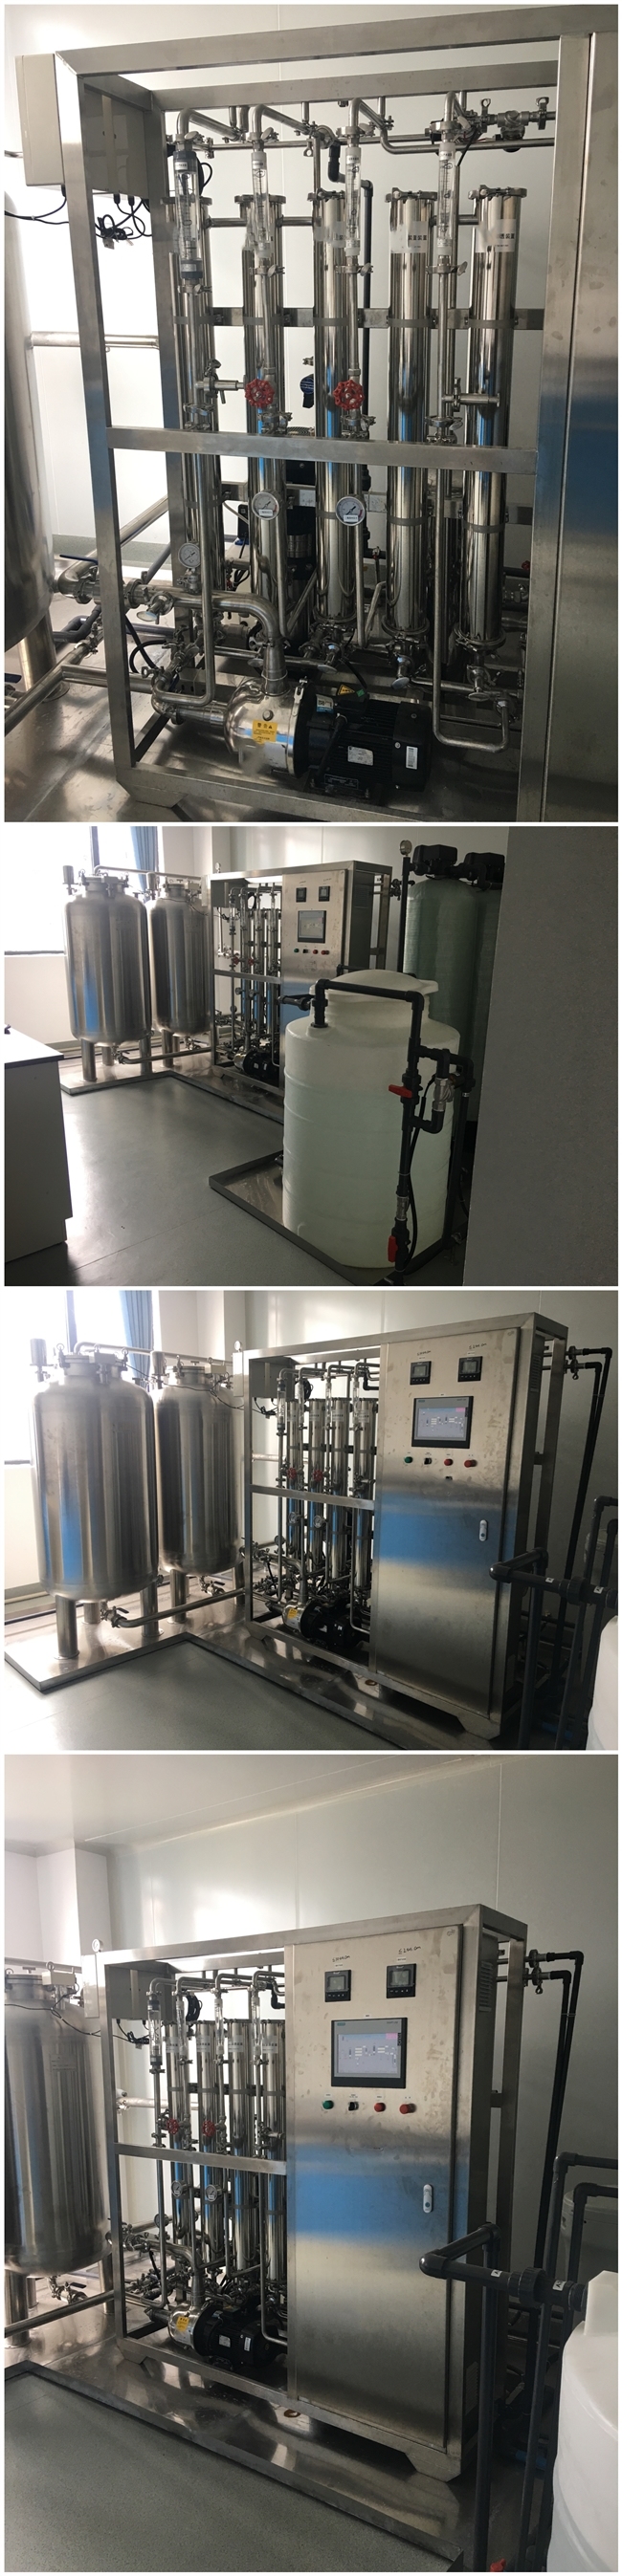 Agriculture Water Softener Ion Exchange Water Softener Industrial Water Purification Systems Z611